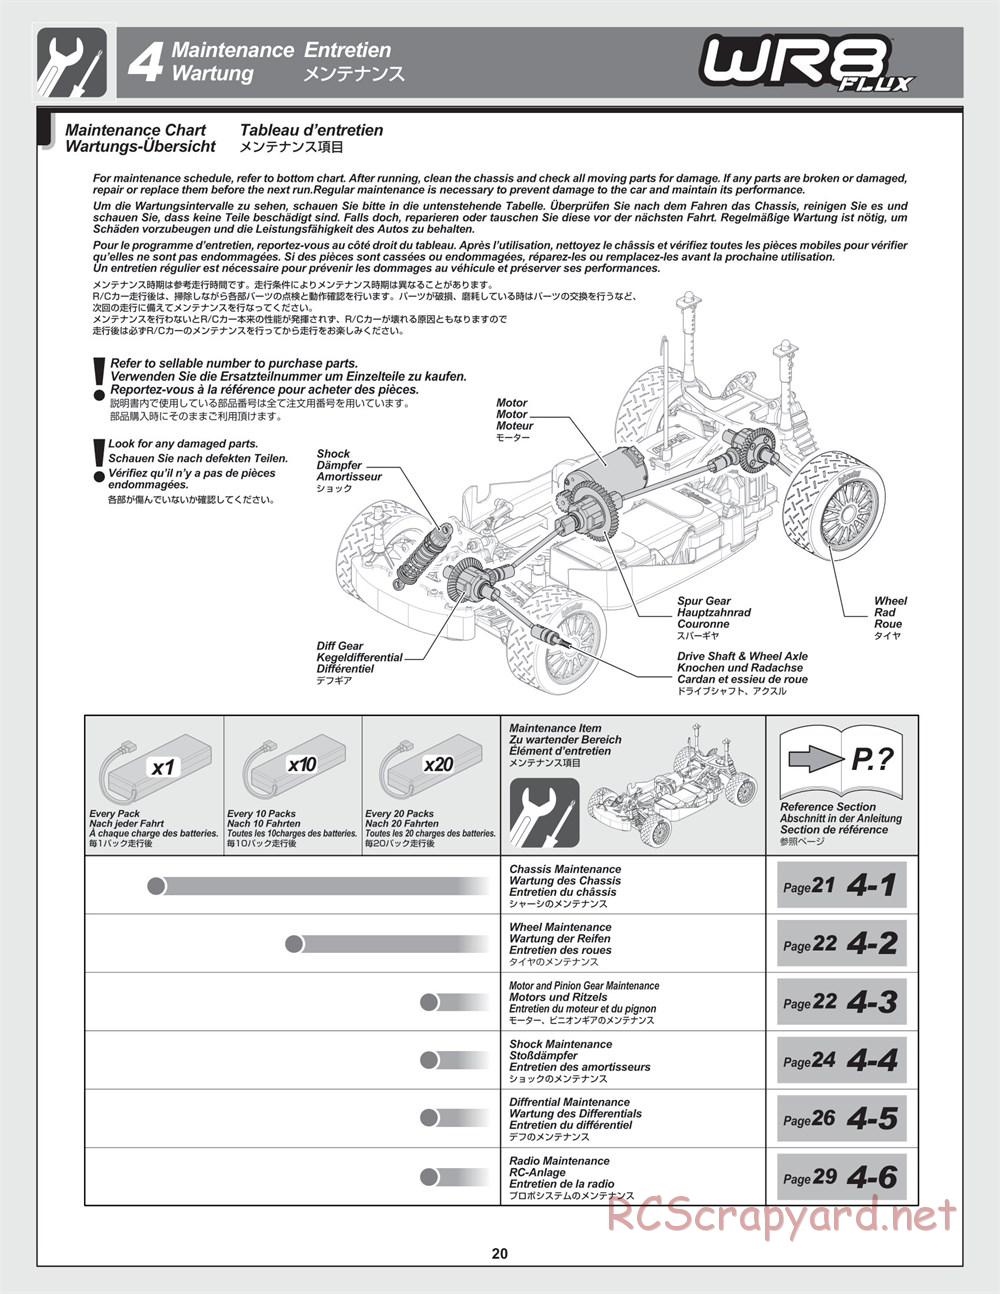 HPI - WR8 Flux Rally - Manual - Page 20